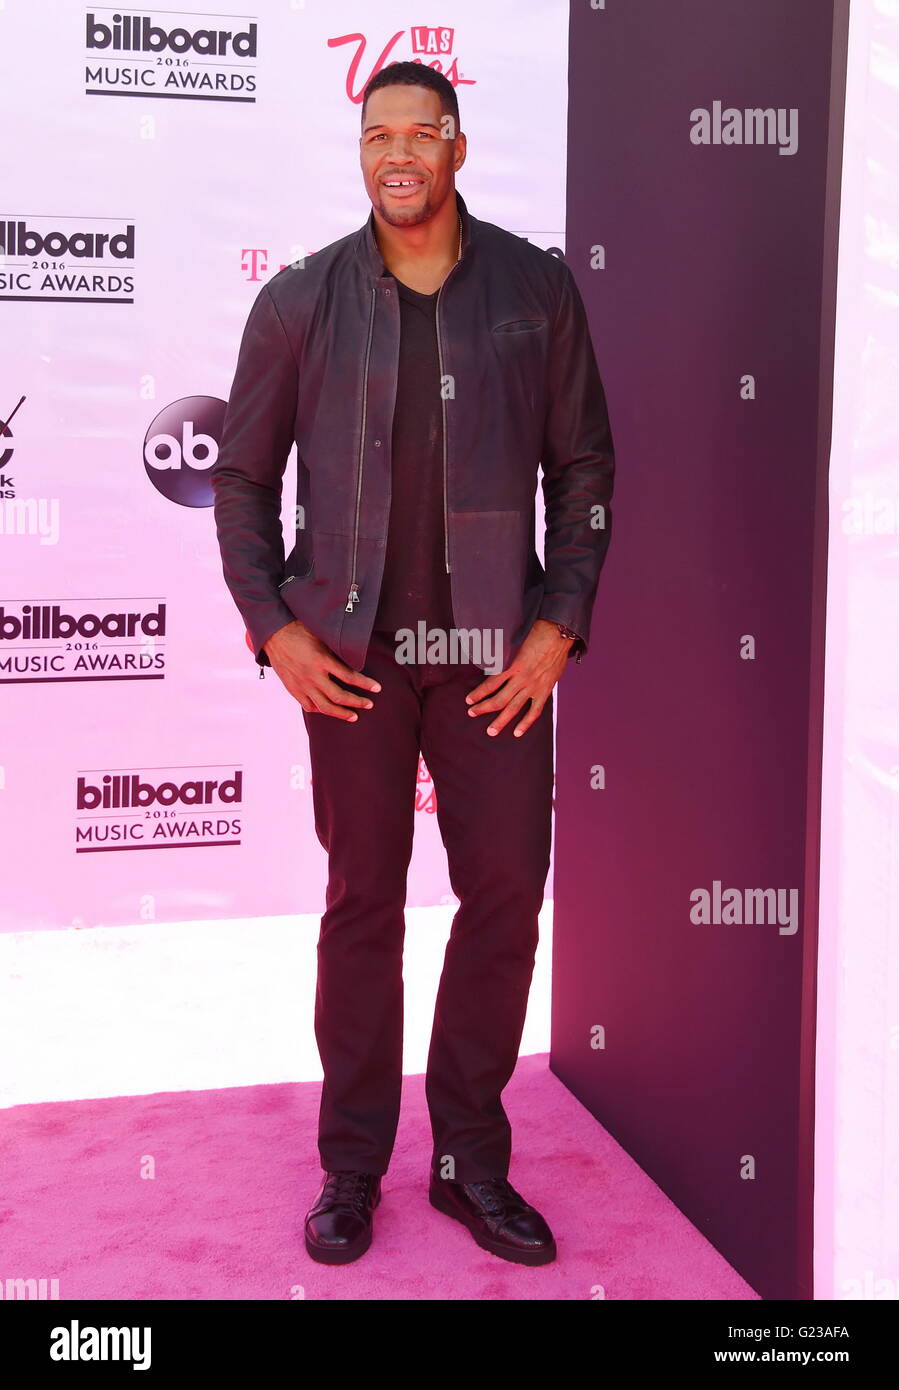 LAS VEGAS, NV - MAY 22: TV personality Michael Strahan attends the 2016 Billboard Music Awards at T-Mobile Arena on May 22, 2016 in Las Vegas, Nevada. | Verwendung weltweit Stock Photo